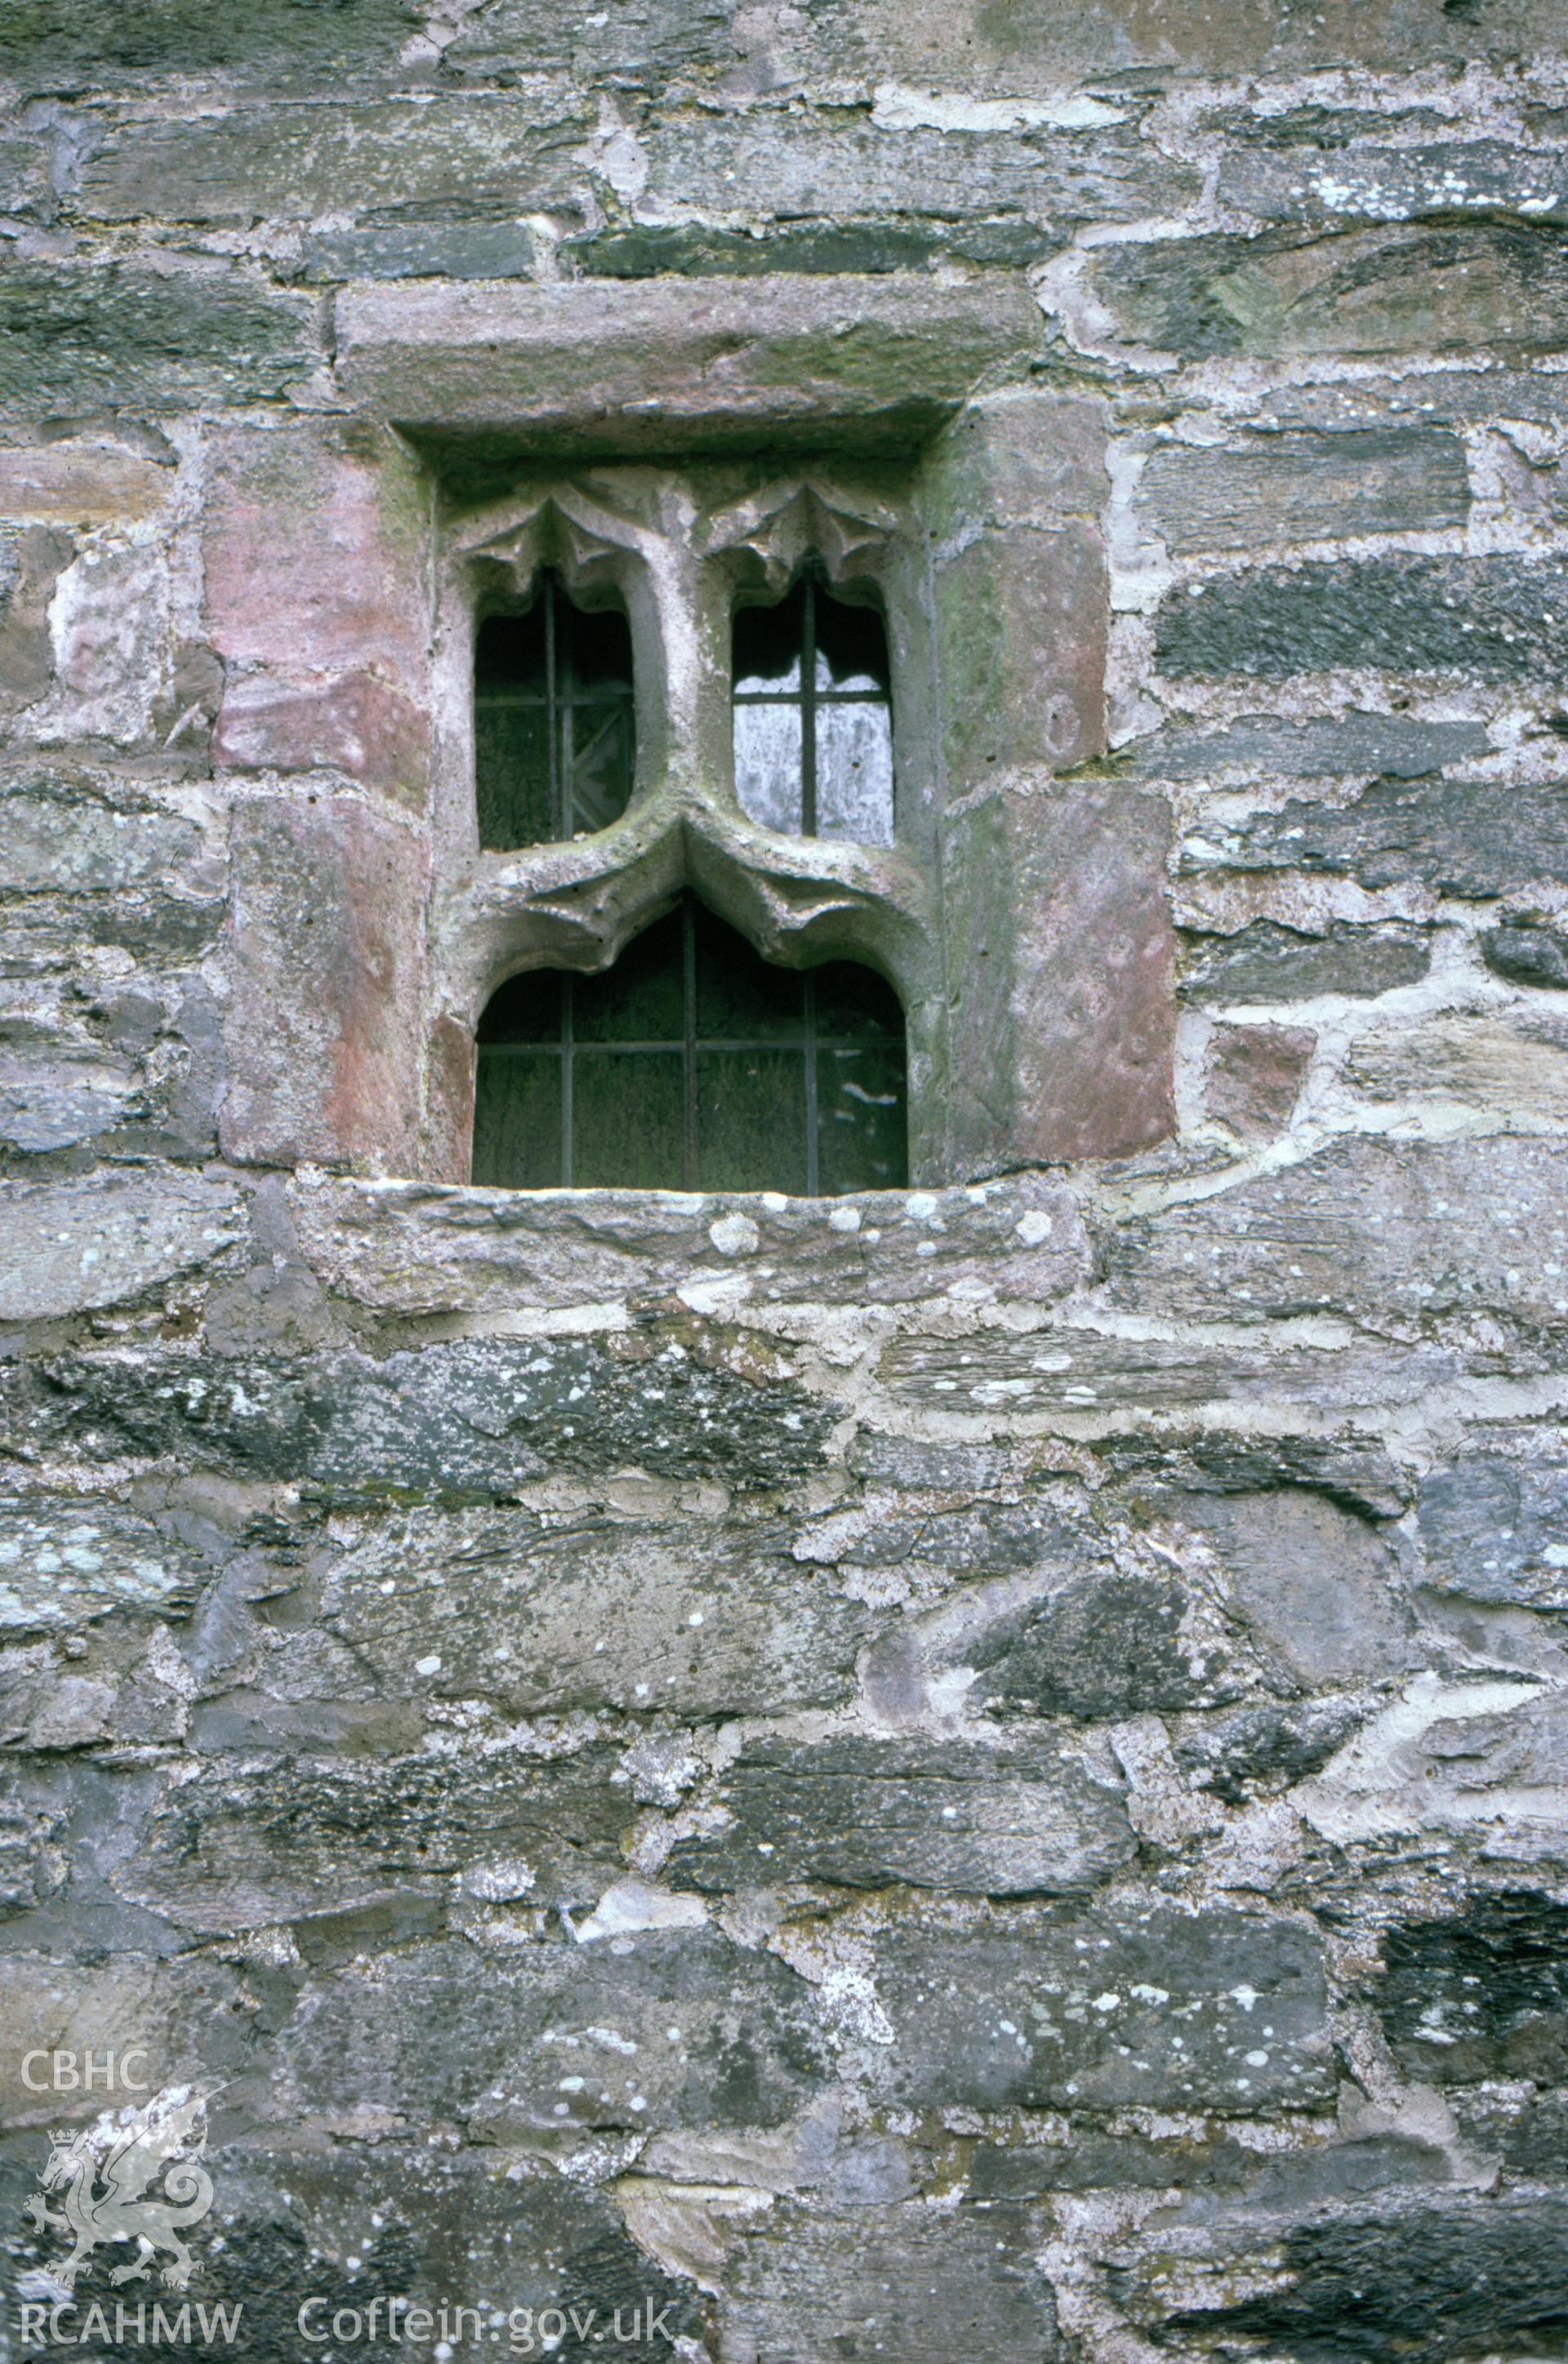 Colour slide of Gwydir Castle, showing detail of window.